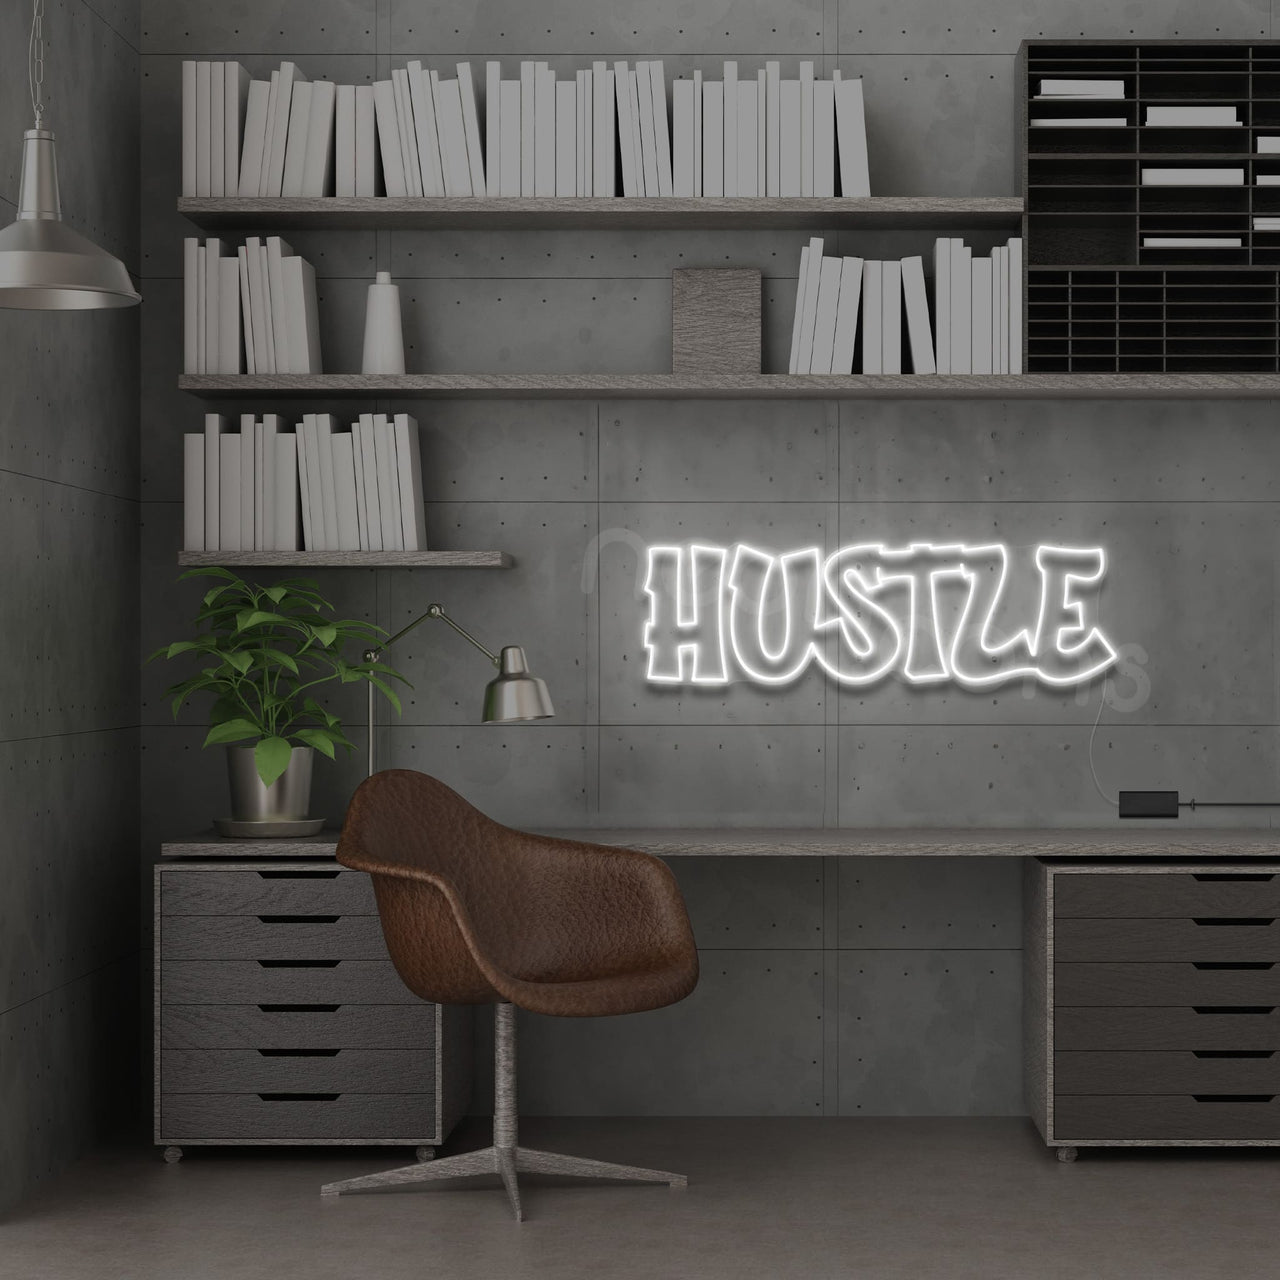 "Hustle" Neon Sign 60cm (2ft) / White / LED by Neon Icons